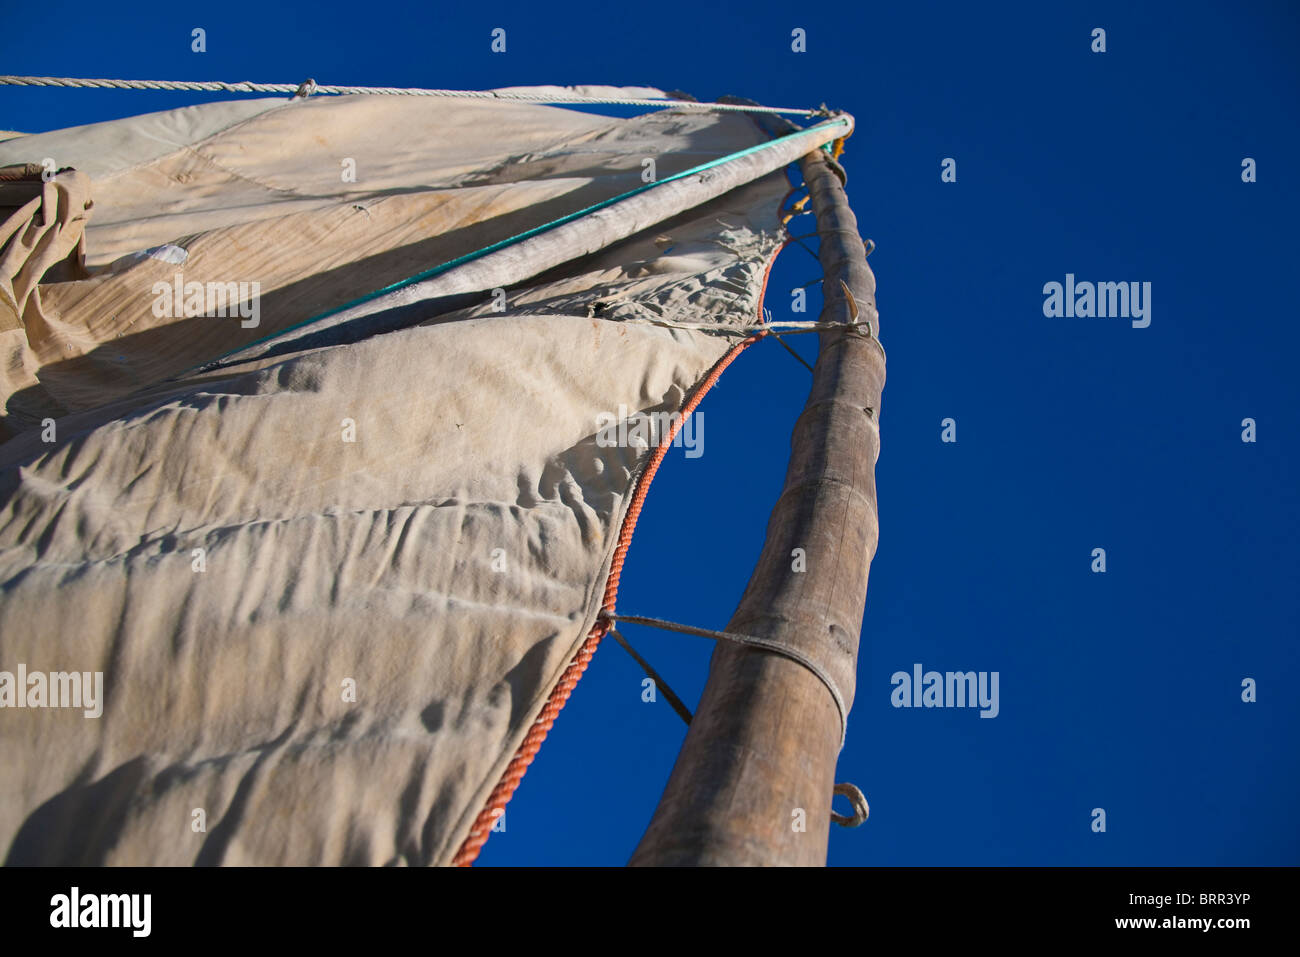 Low angle view of the mast and canvas sail of a dhow or traditional fishing boat Stock Photo